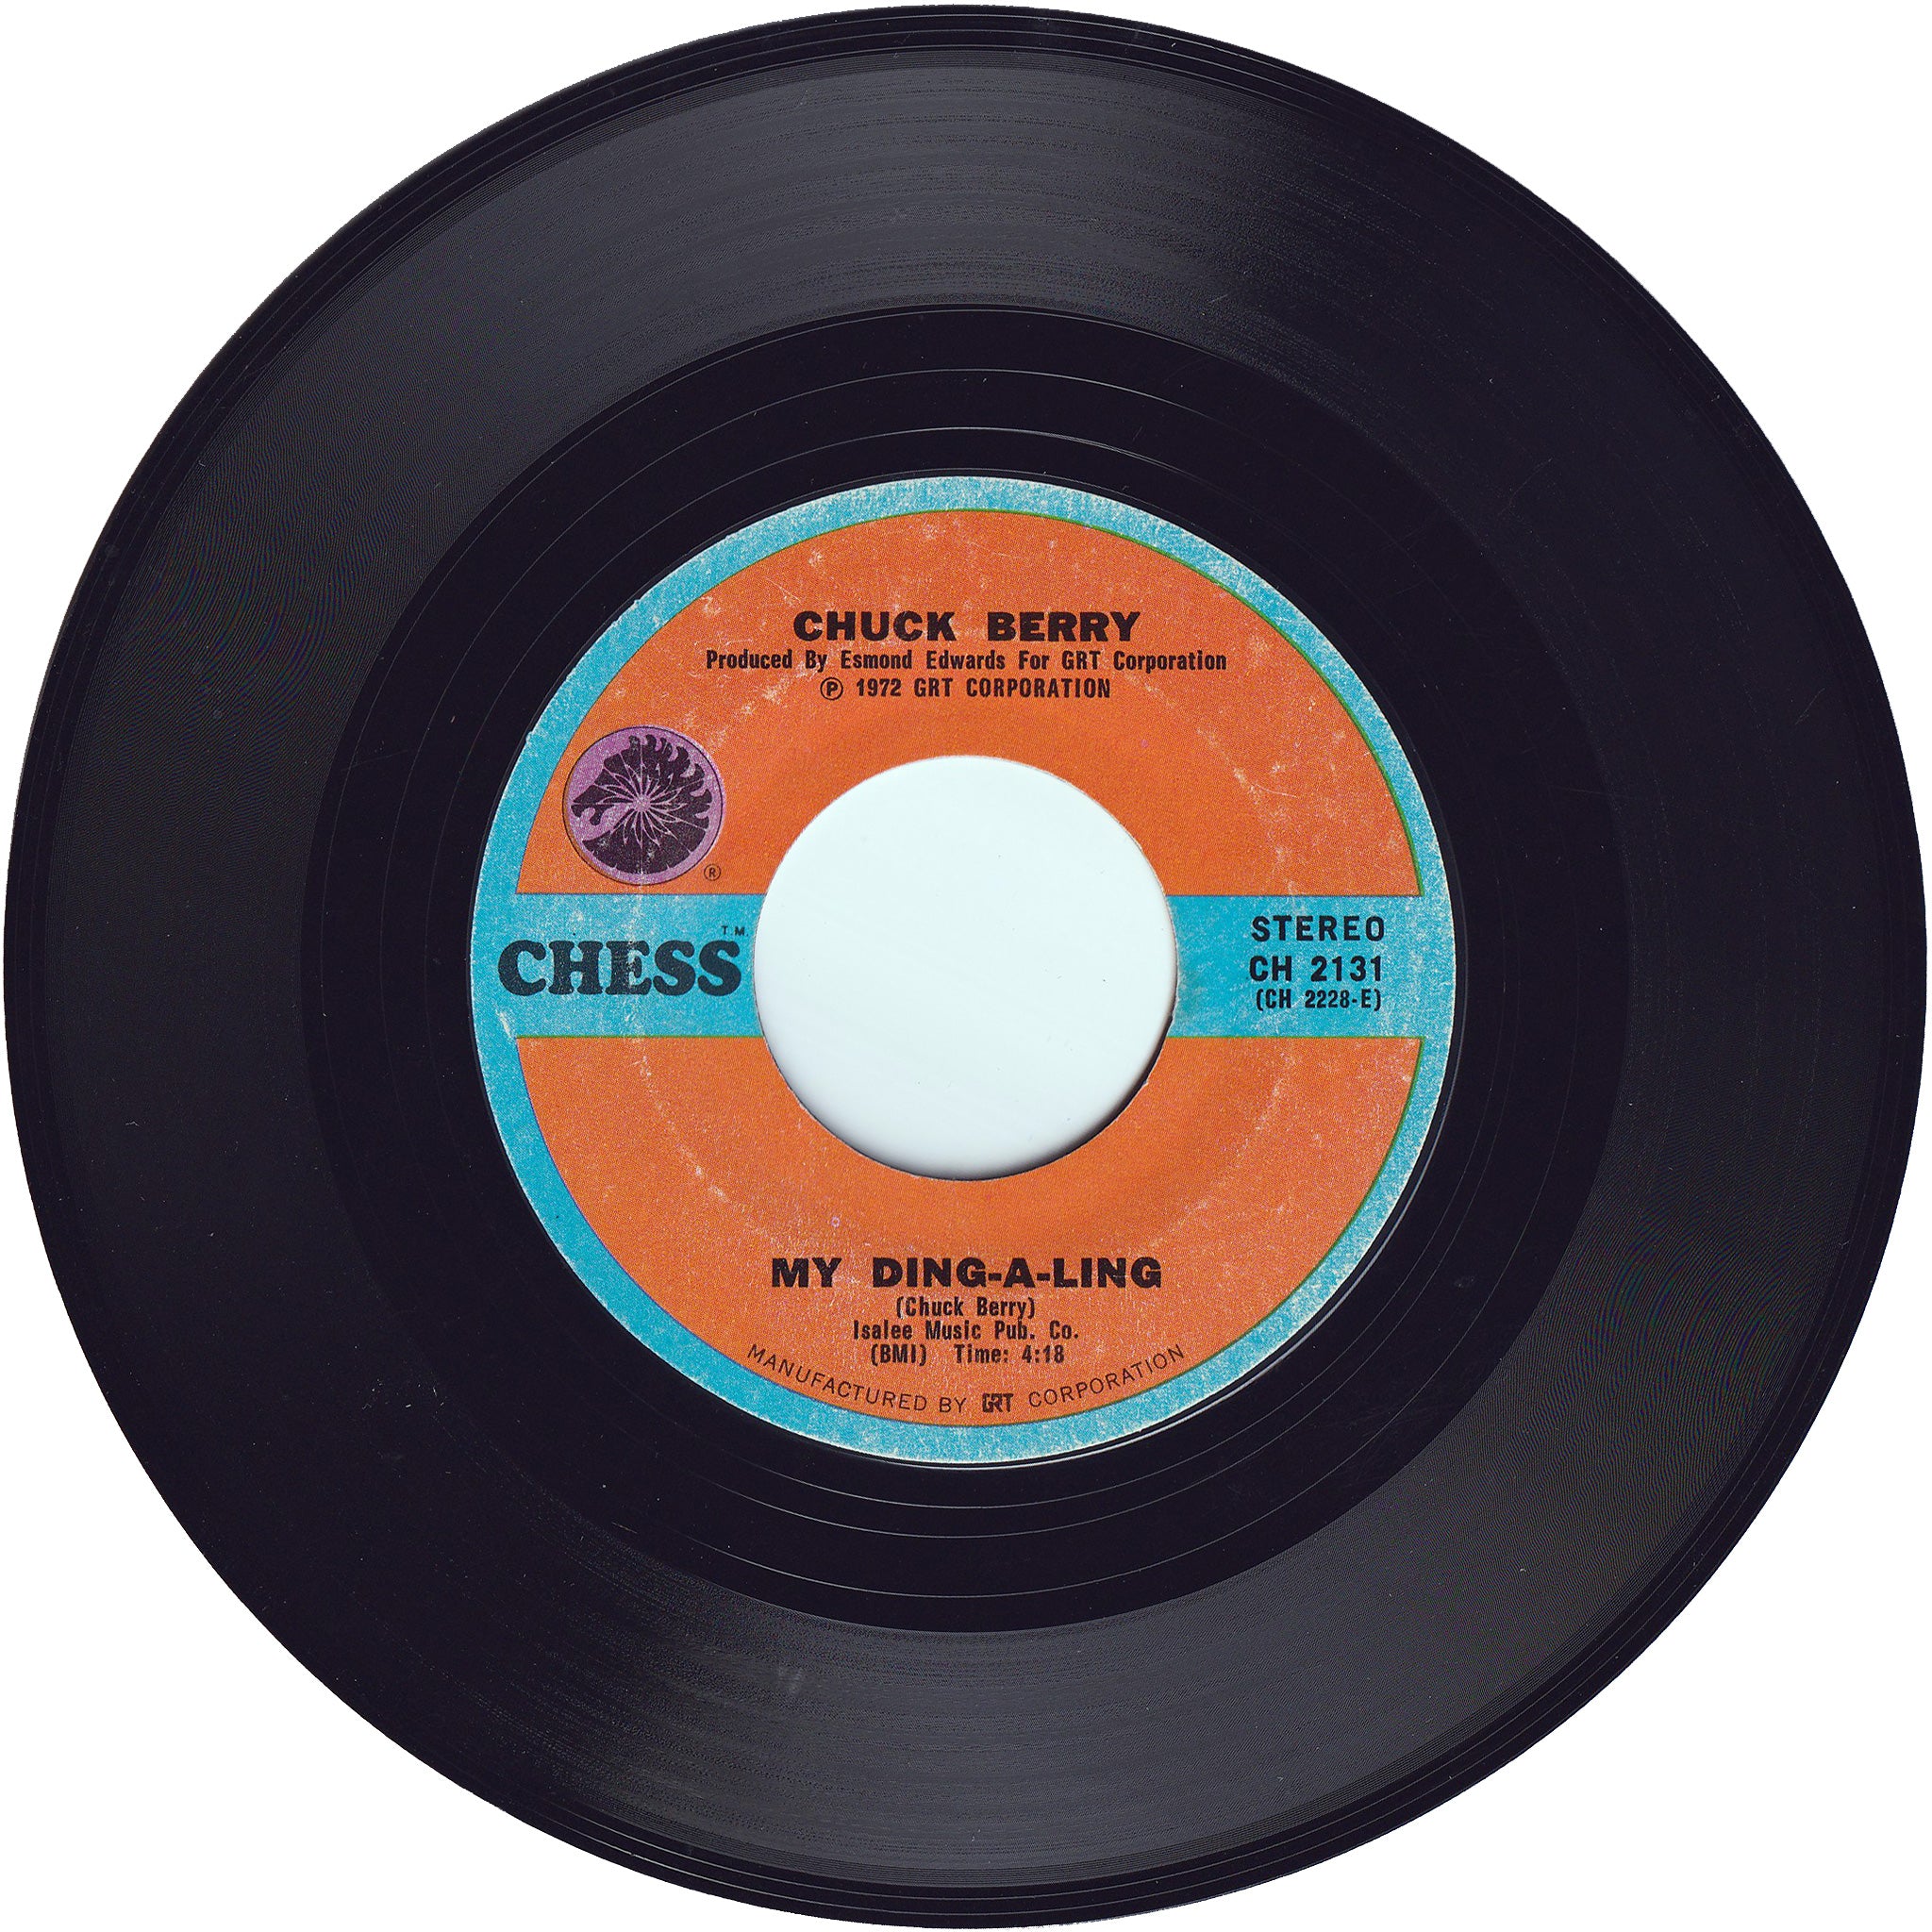 Chuck Berry - My Ding-a-Ling / Johnny B. Goode – NIGHT BEAT RECORDS